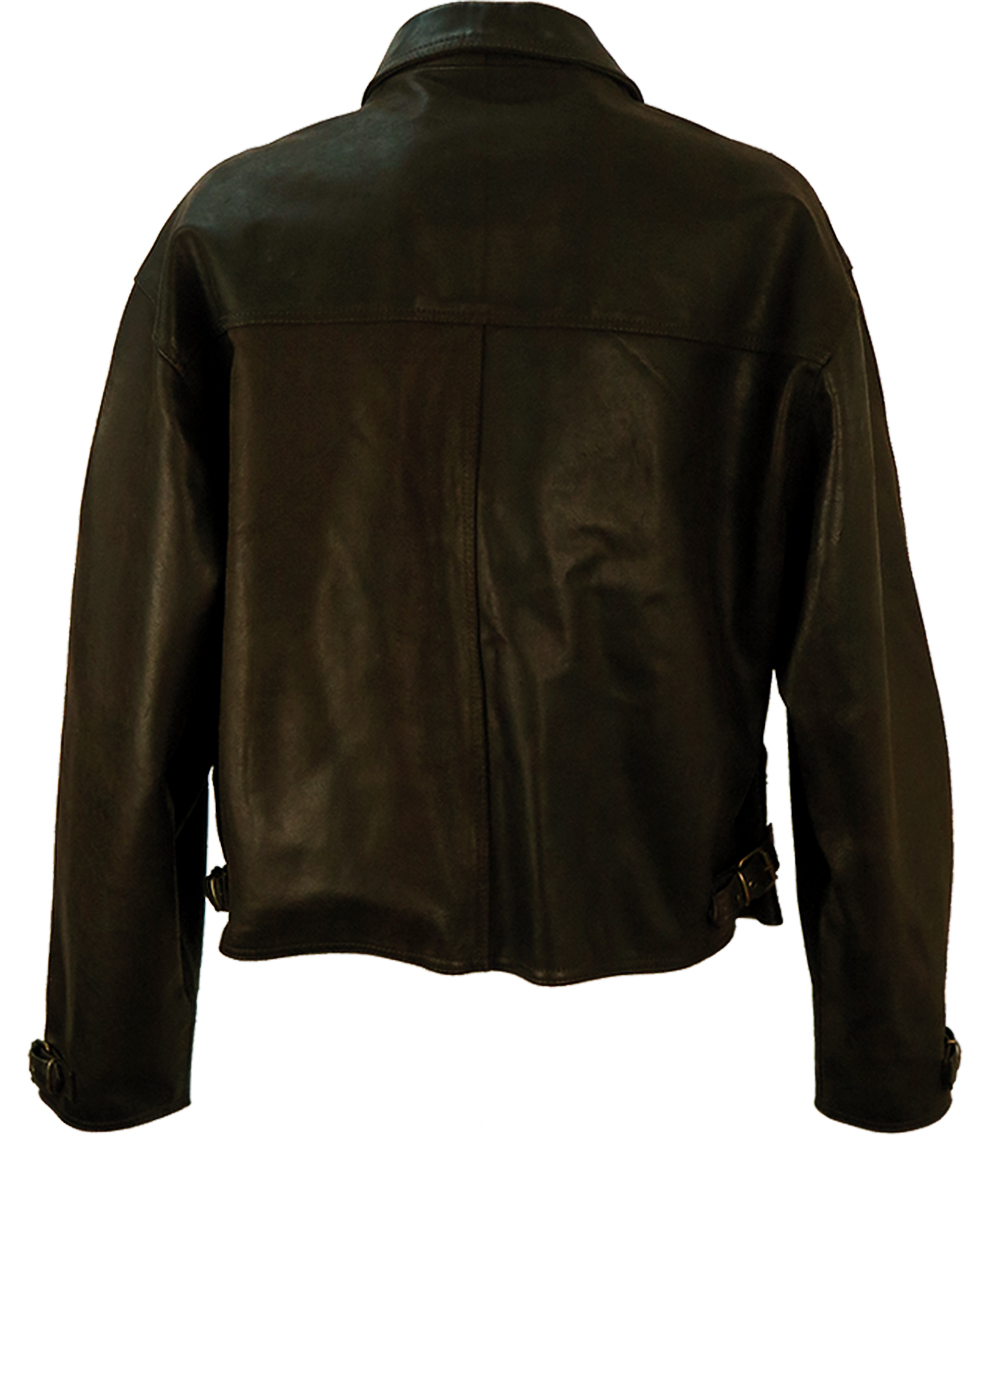 Brown Leather Jacket with Cuff & Side Buckle Detail - XL | Reign Vintage